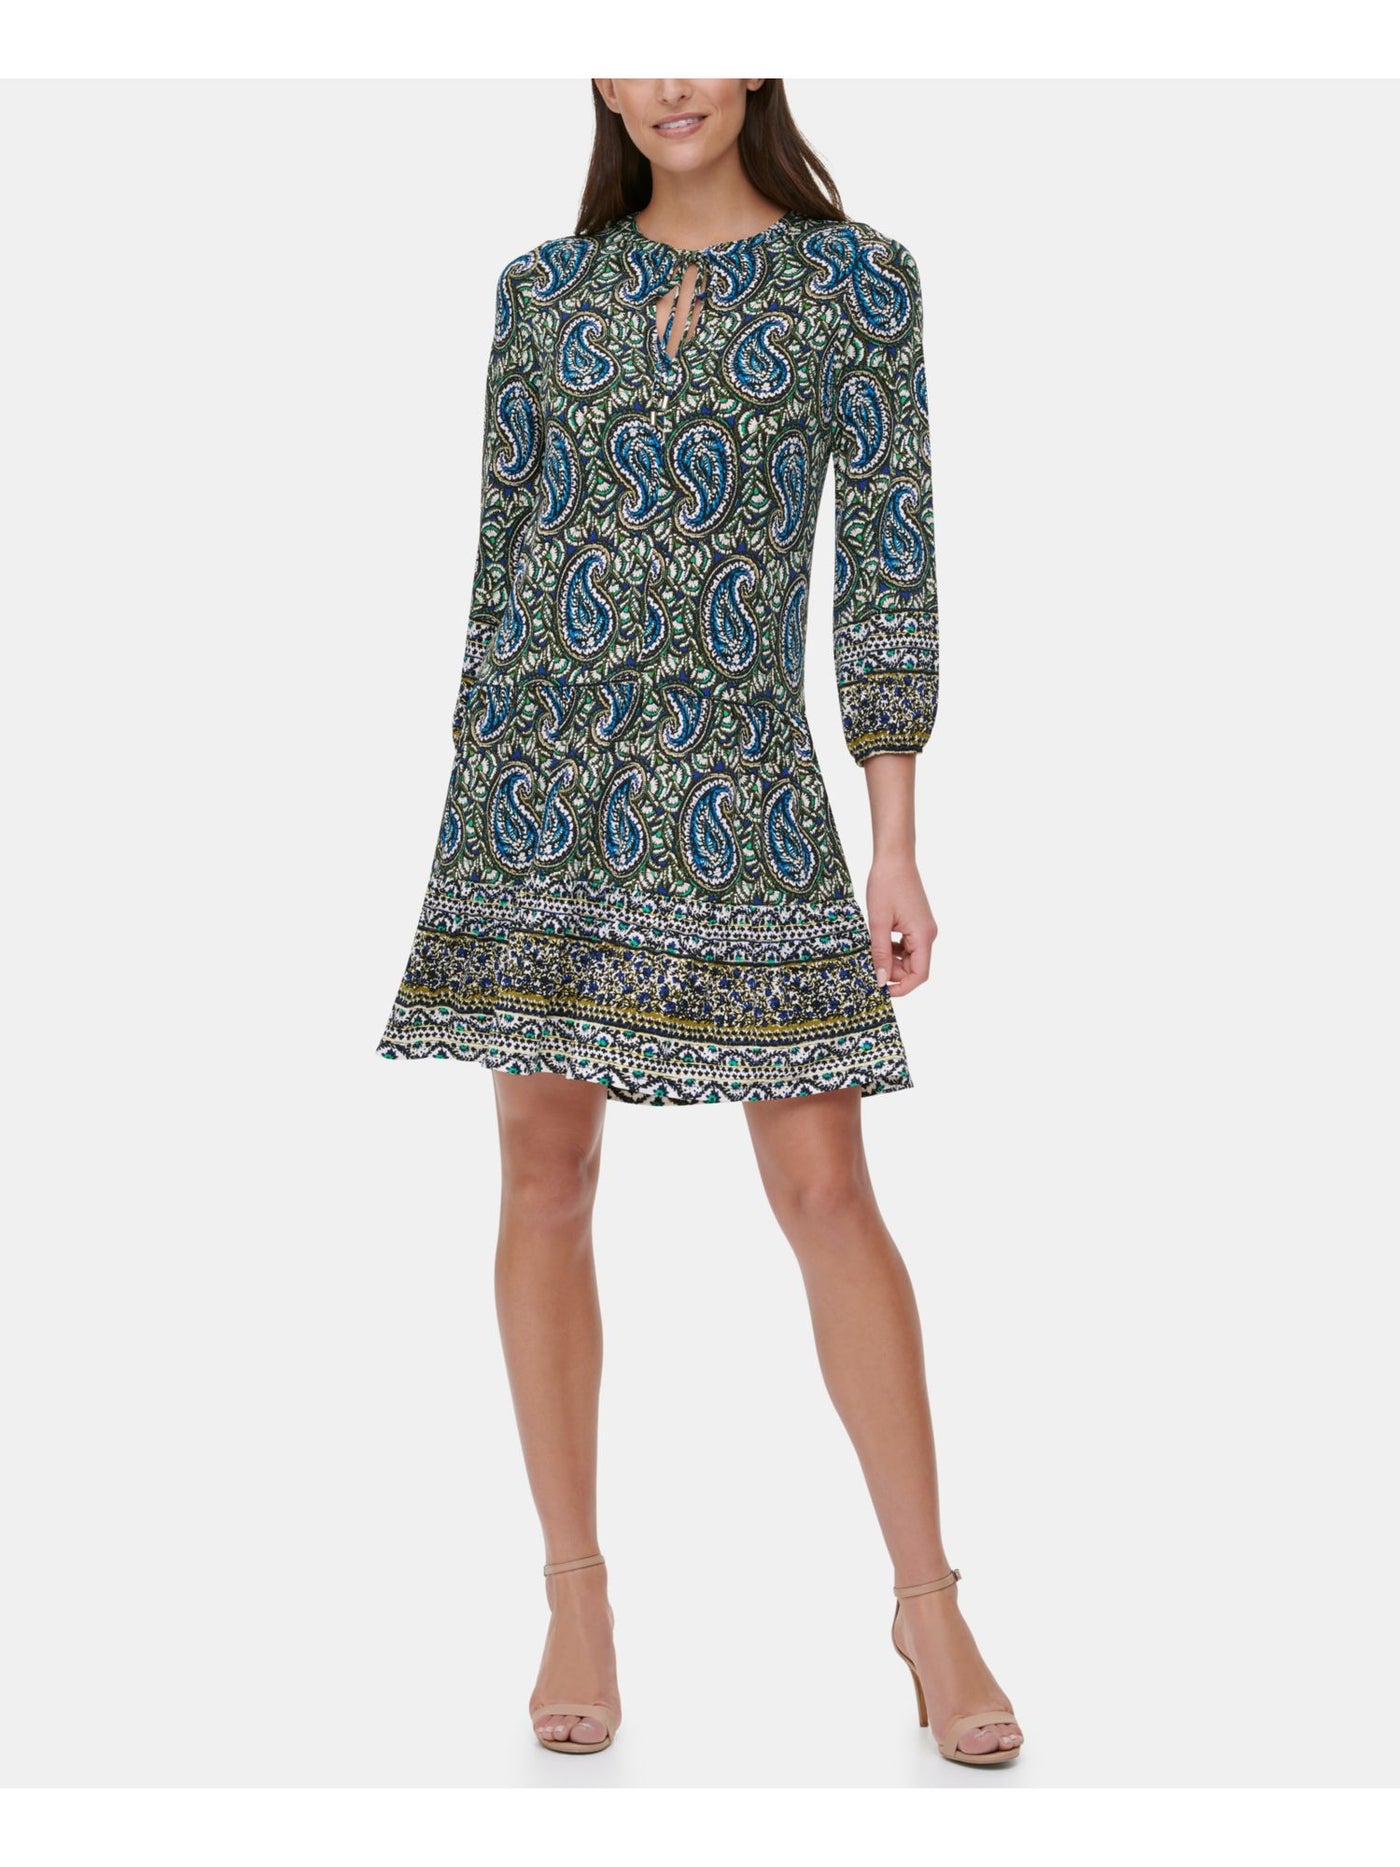 TOMMY HILFIGER Womens Green Stretch Paisley 3/4 Sleeve Tie Neck Above The Knee Wear To Work Shift Dress 10